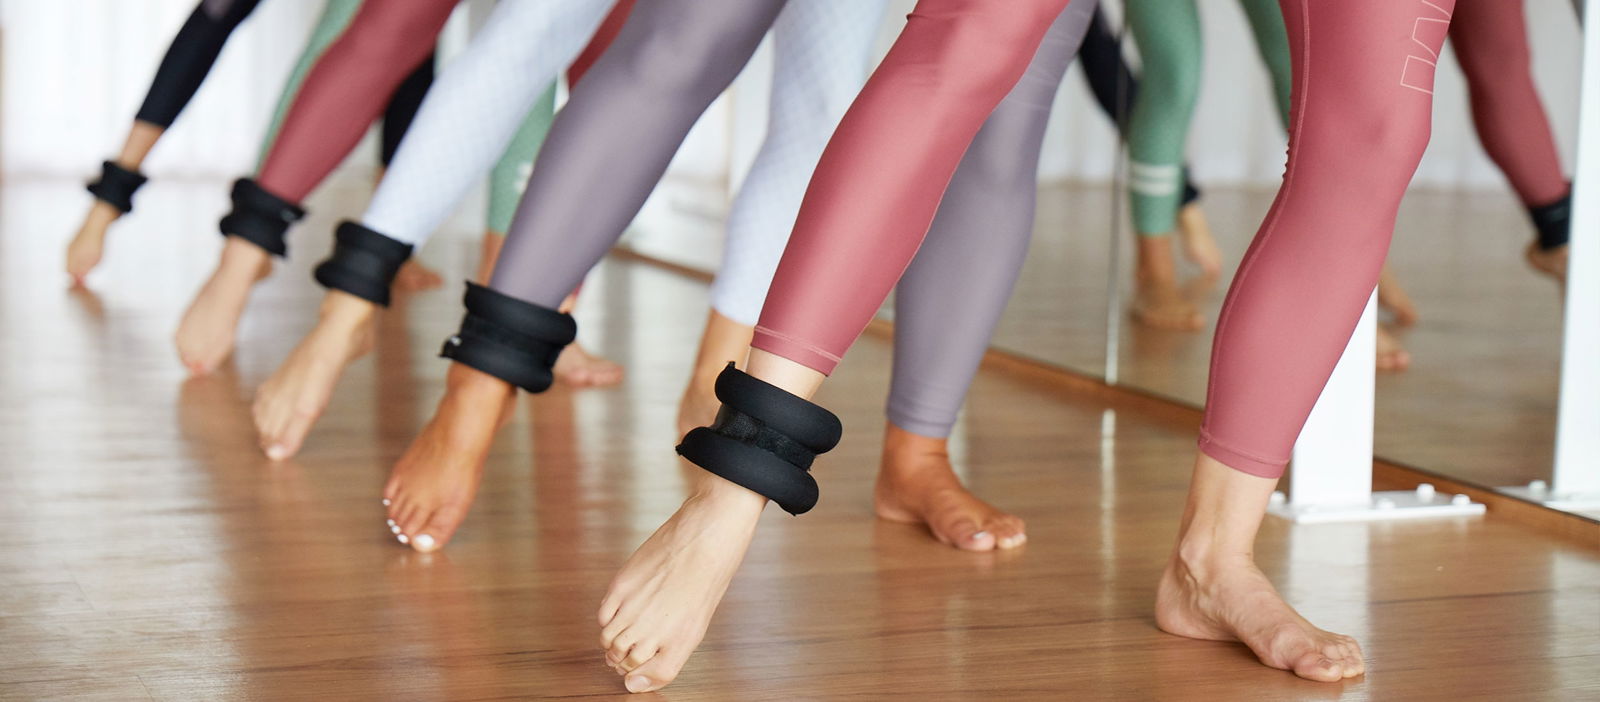 Yoga Ankle Weights at Bende Yoga in Byron Bay